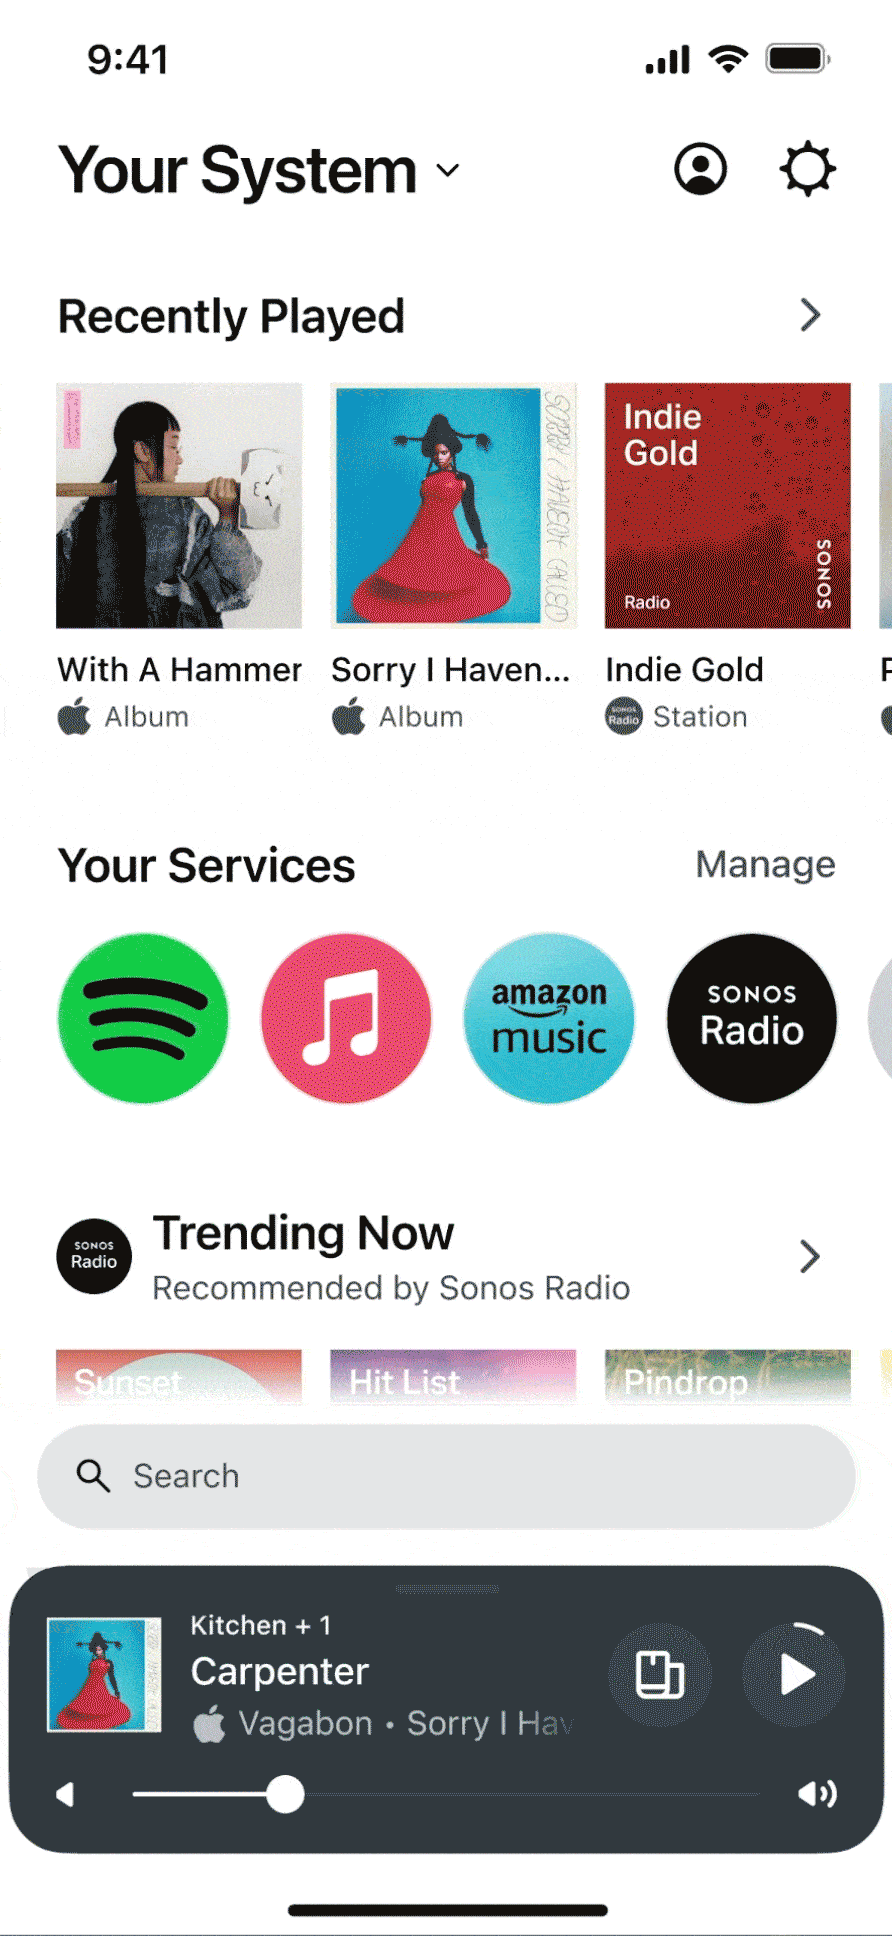 Animated example of a user navigating the new Sonos app home screen